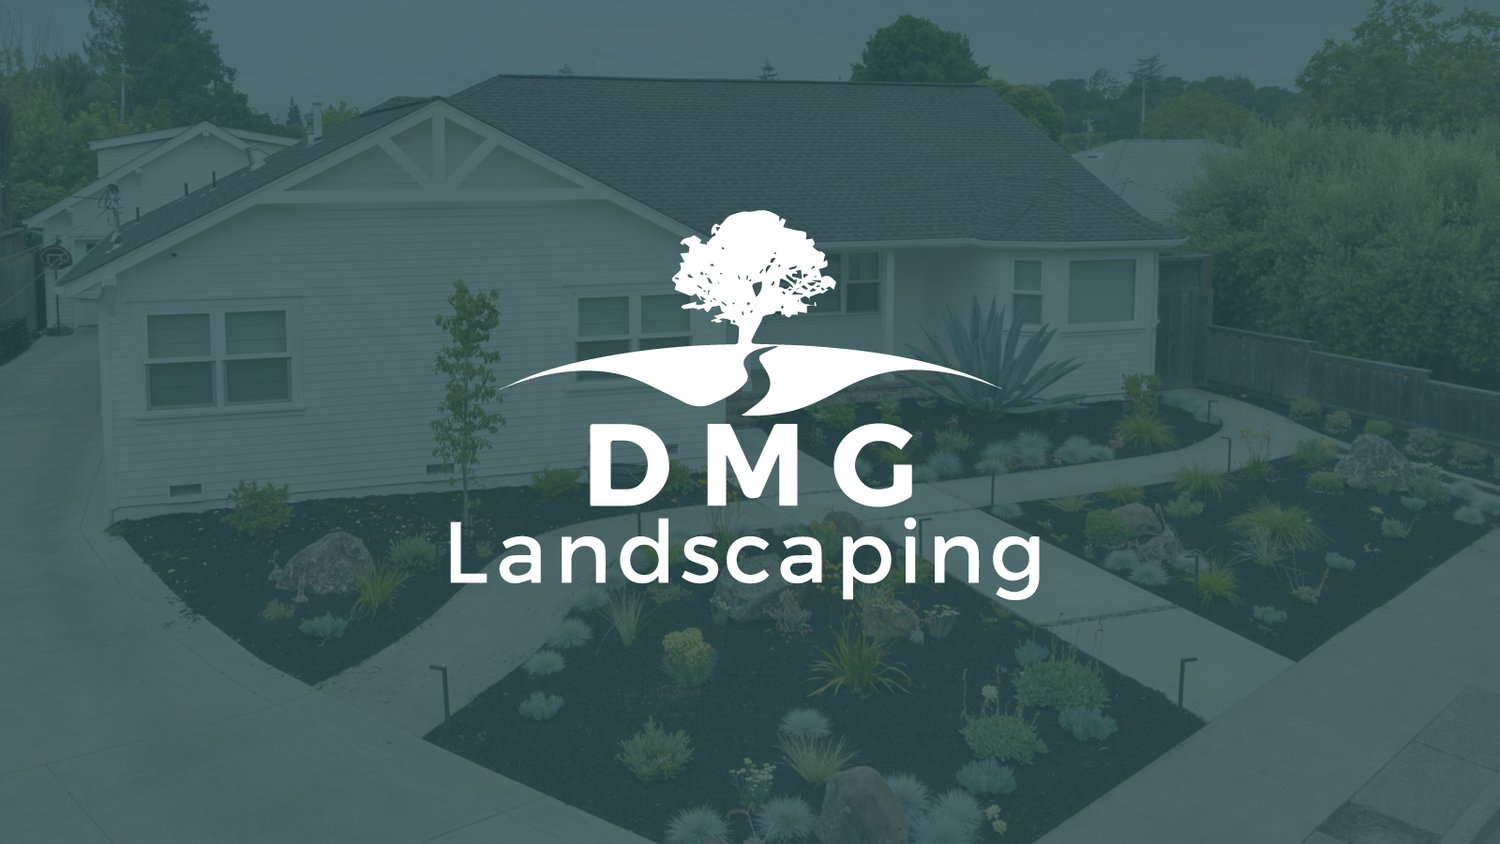 Providing Beautiful and Efficient Landscape Design to Northern California